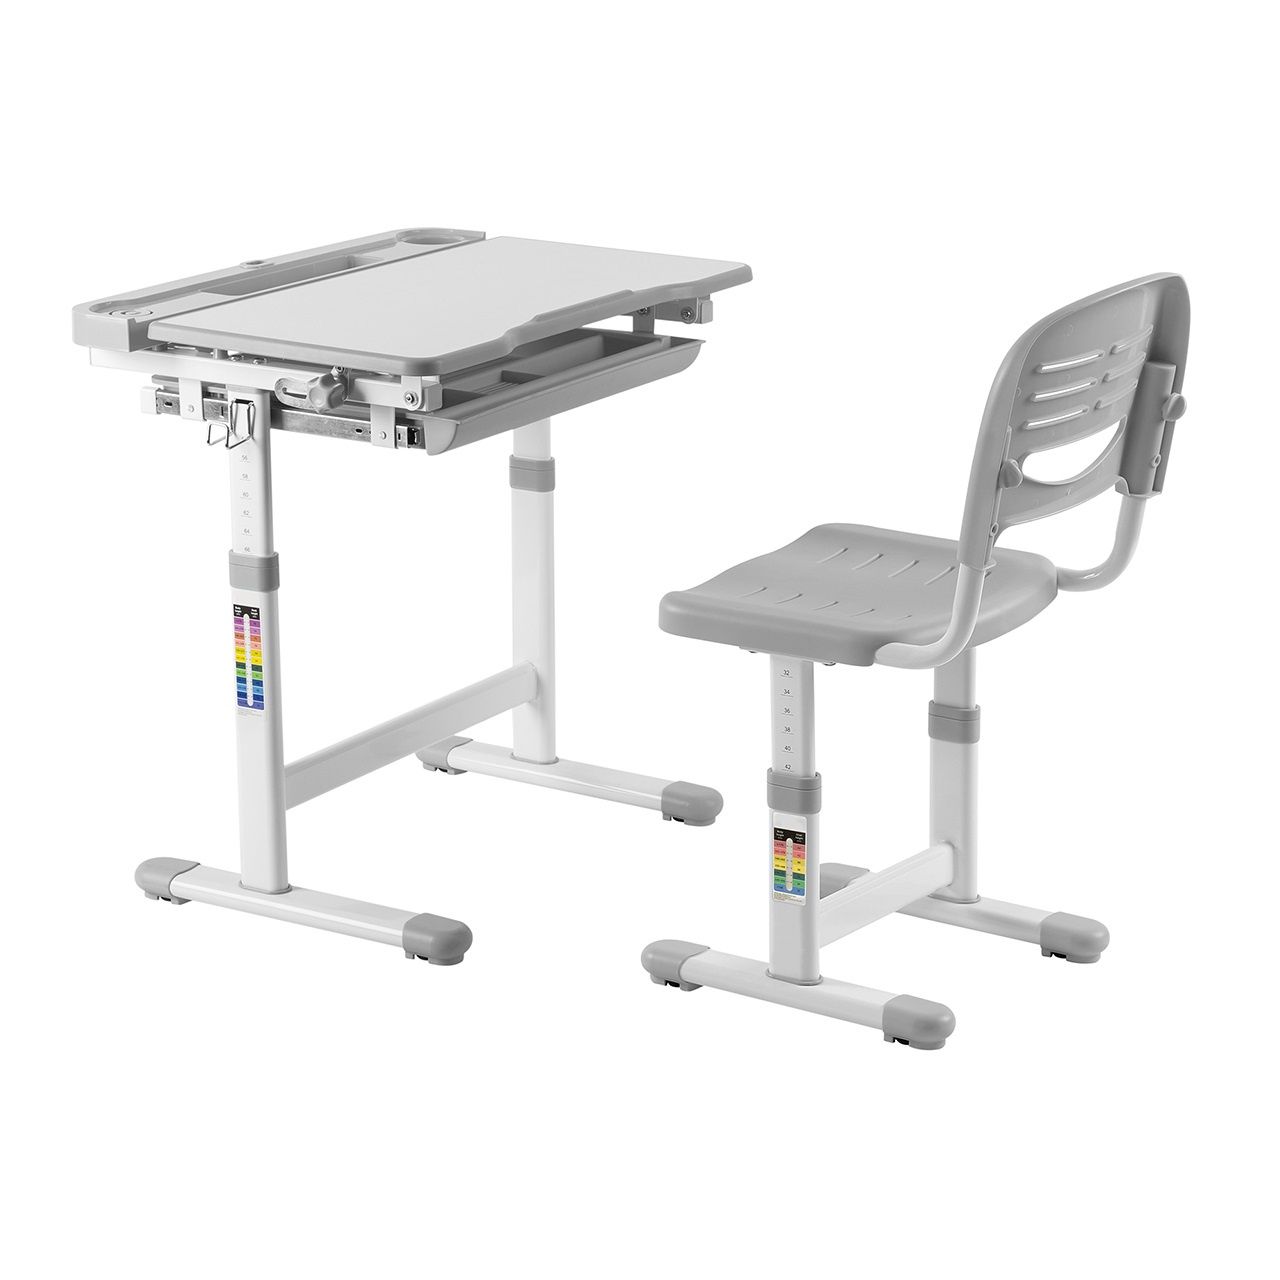    FunDesk Cantare Grey, 515720, , 